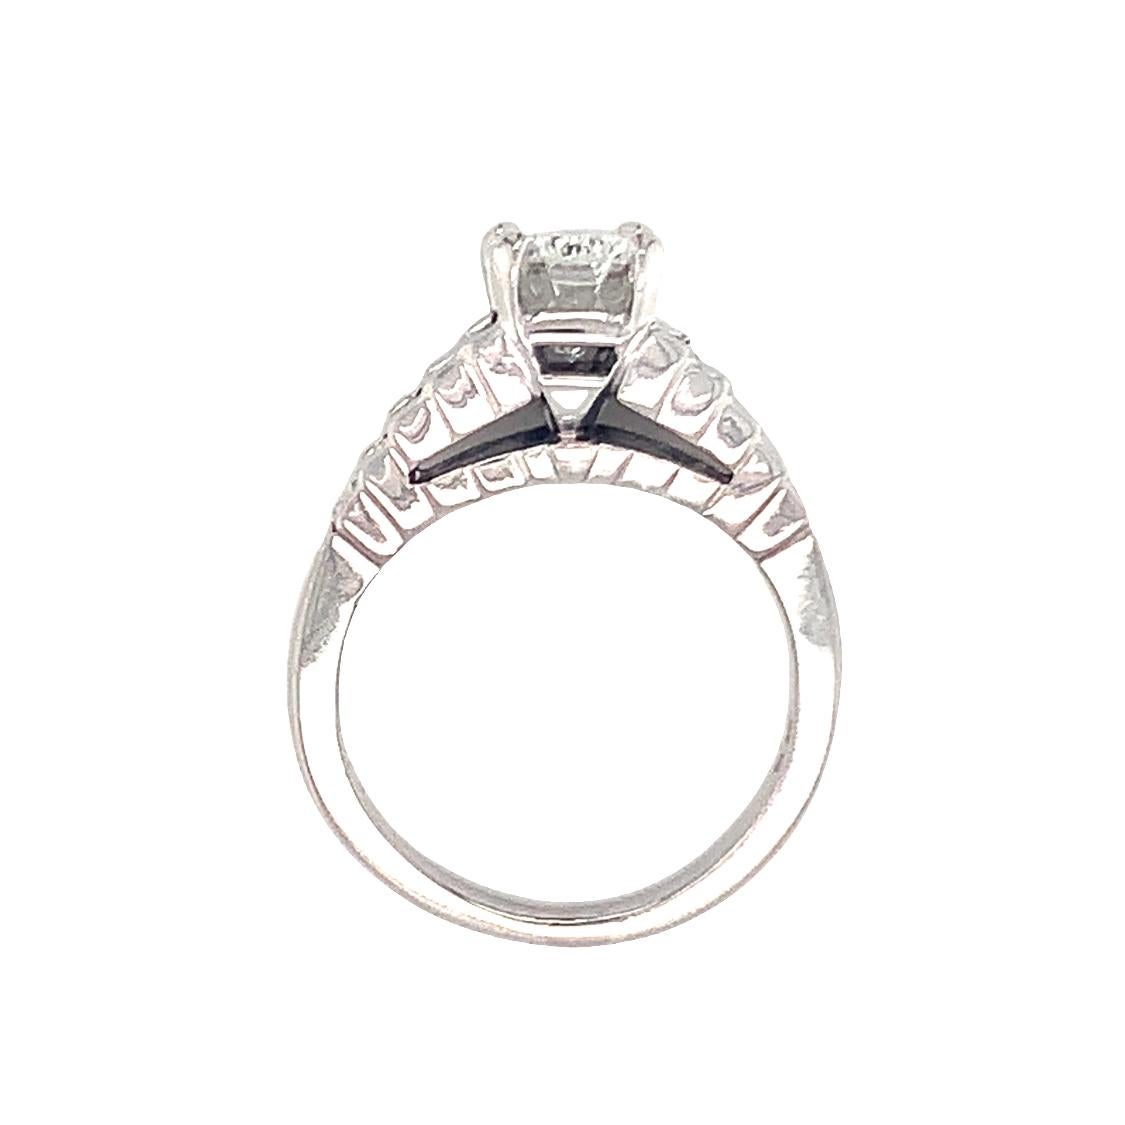 One GIA certified 1.79 ct. diamond platinum engagement ring centering one prong set, radiant cut diamond weighing 1.79 ct. with H color and VVS-2 clarity. The ring is enhanced with a tiered baguette cut diamond design with ten baguette diamonds